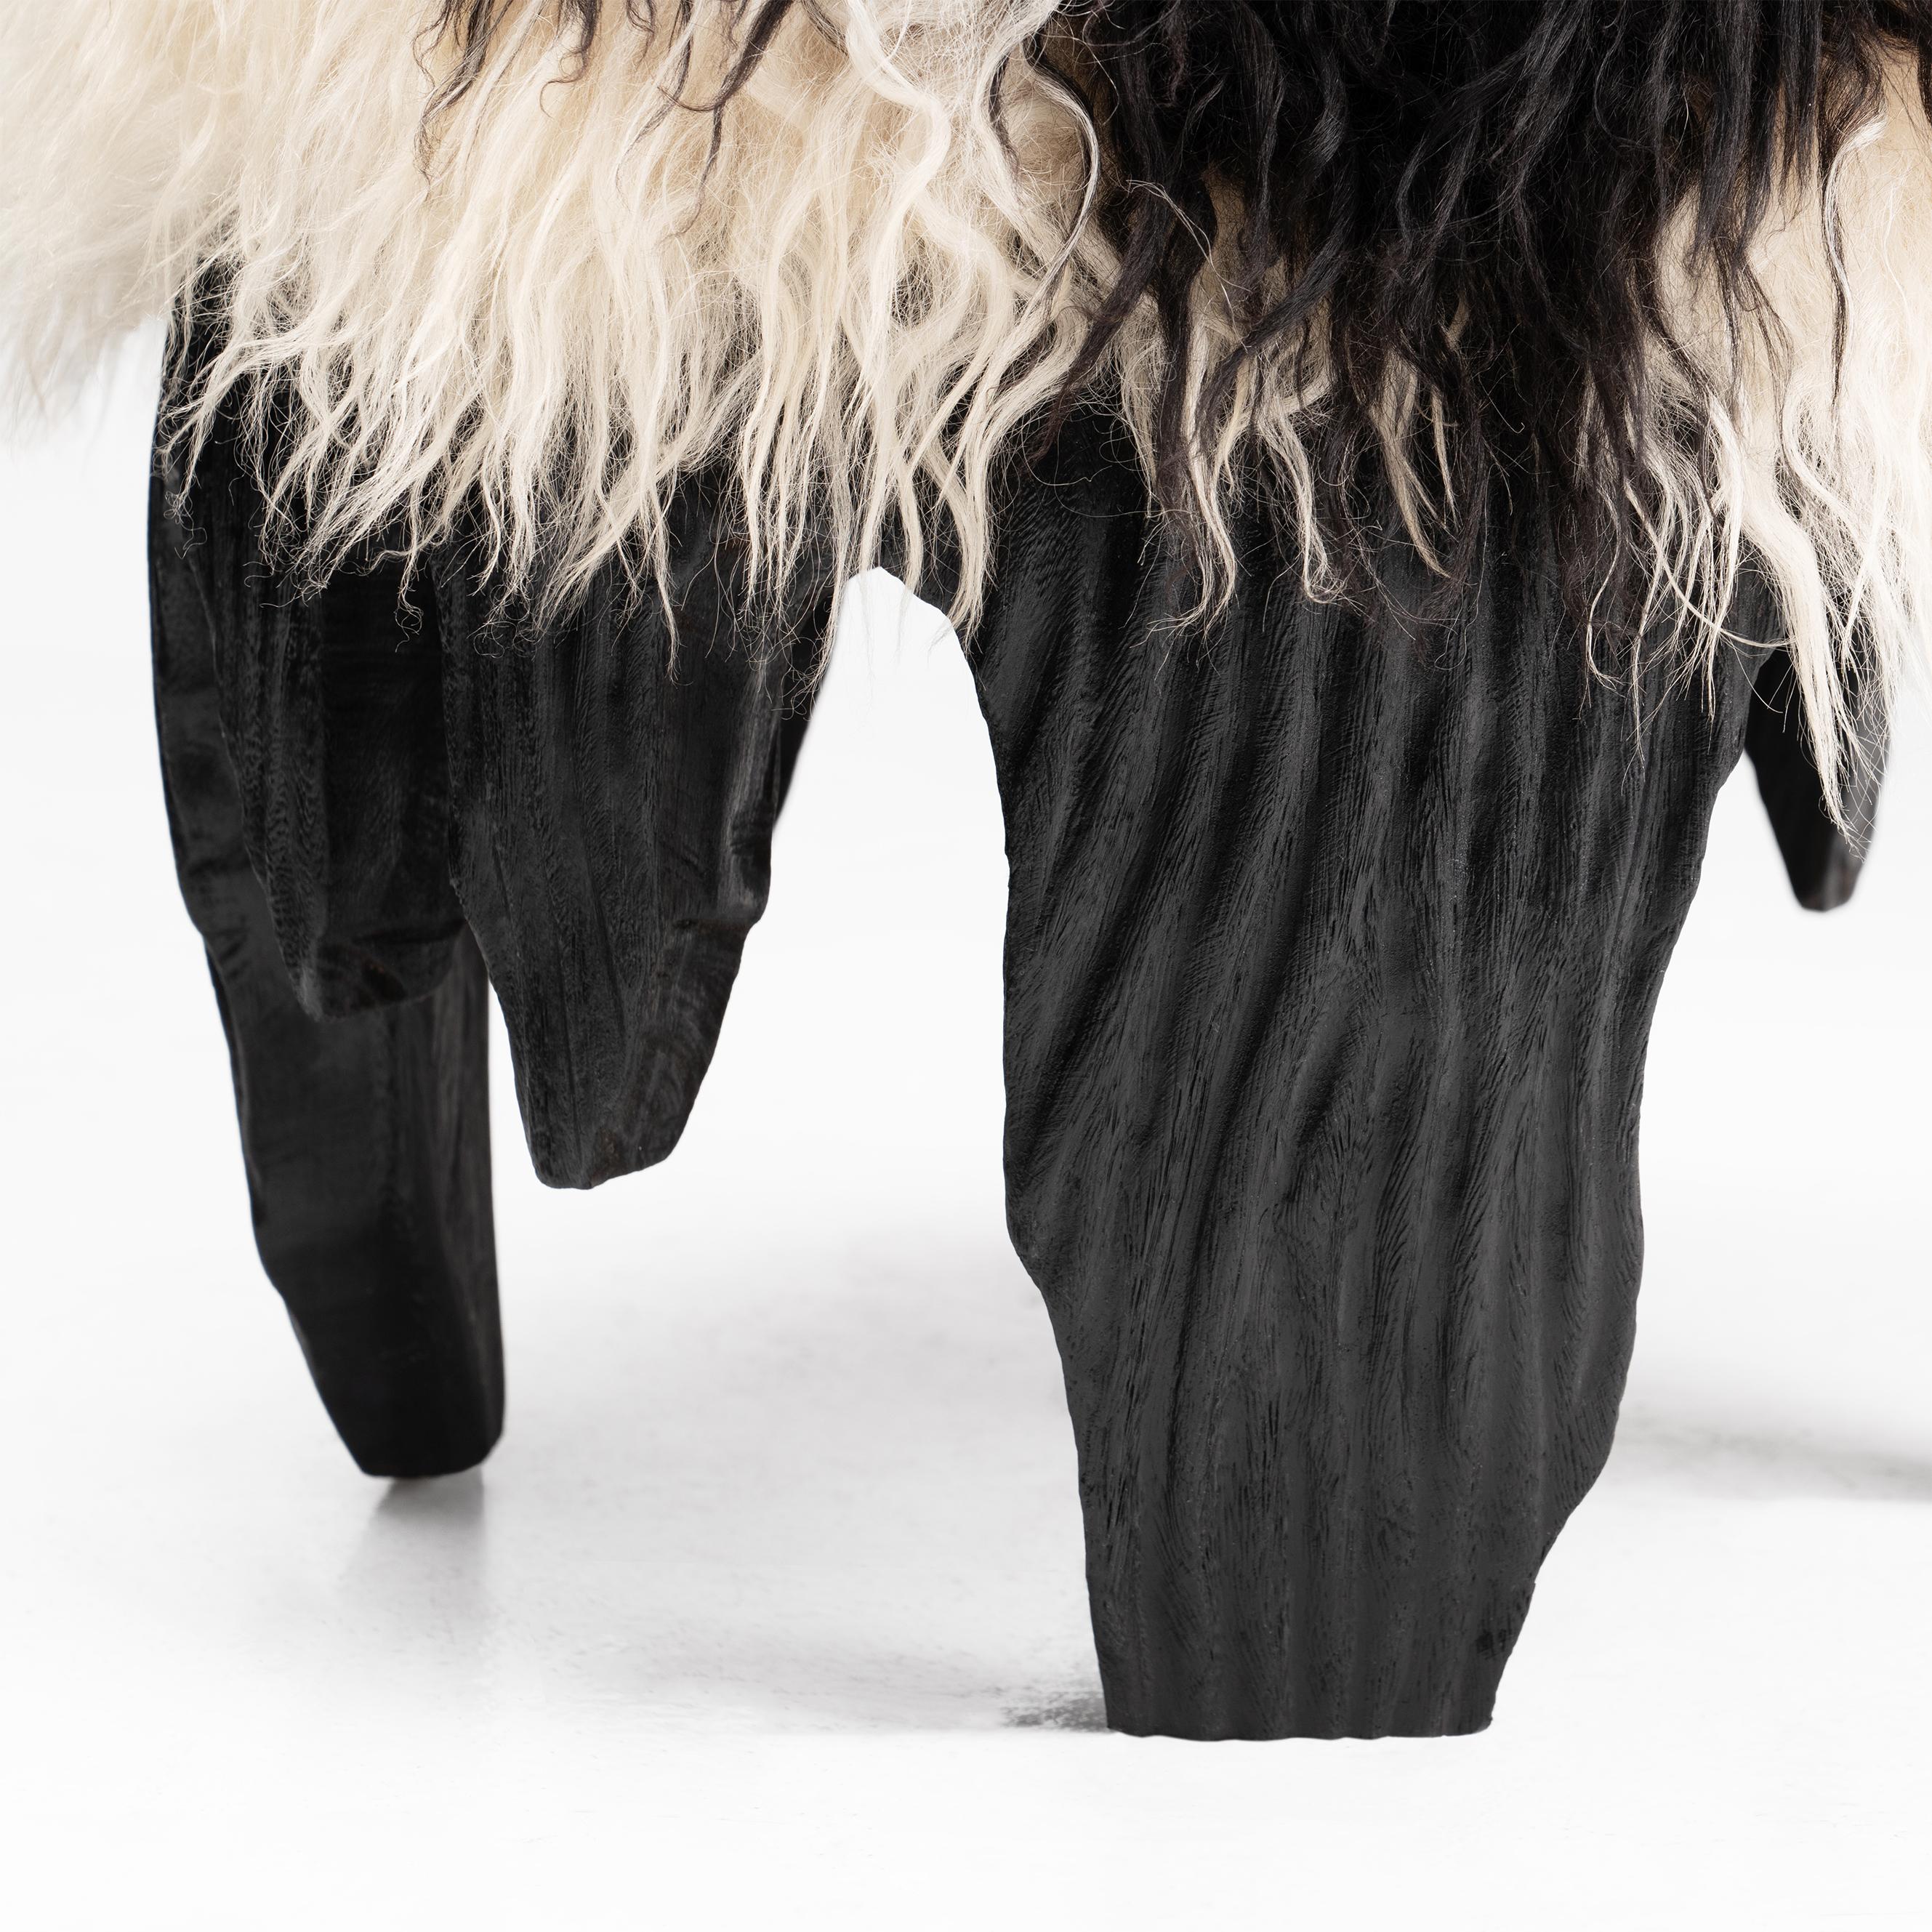 Oceanic El Topo • Sculptural Hand-Carved Acacia & Sheepskin Ottoman by Odditi For Sale